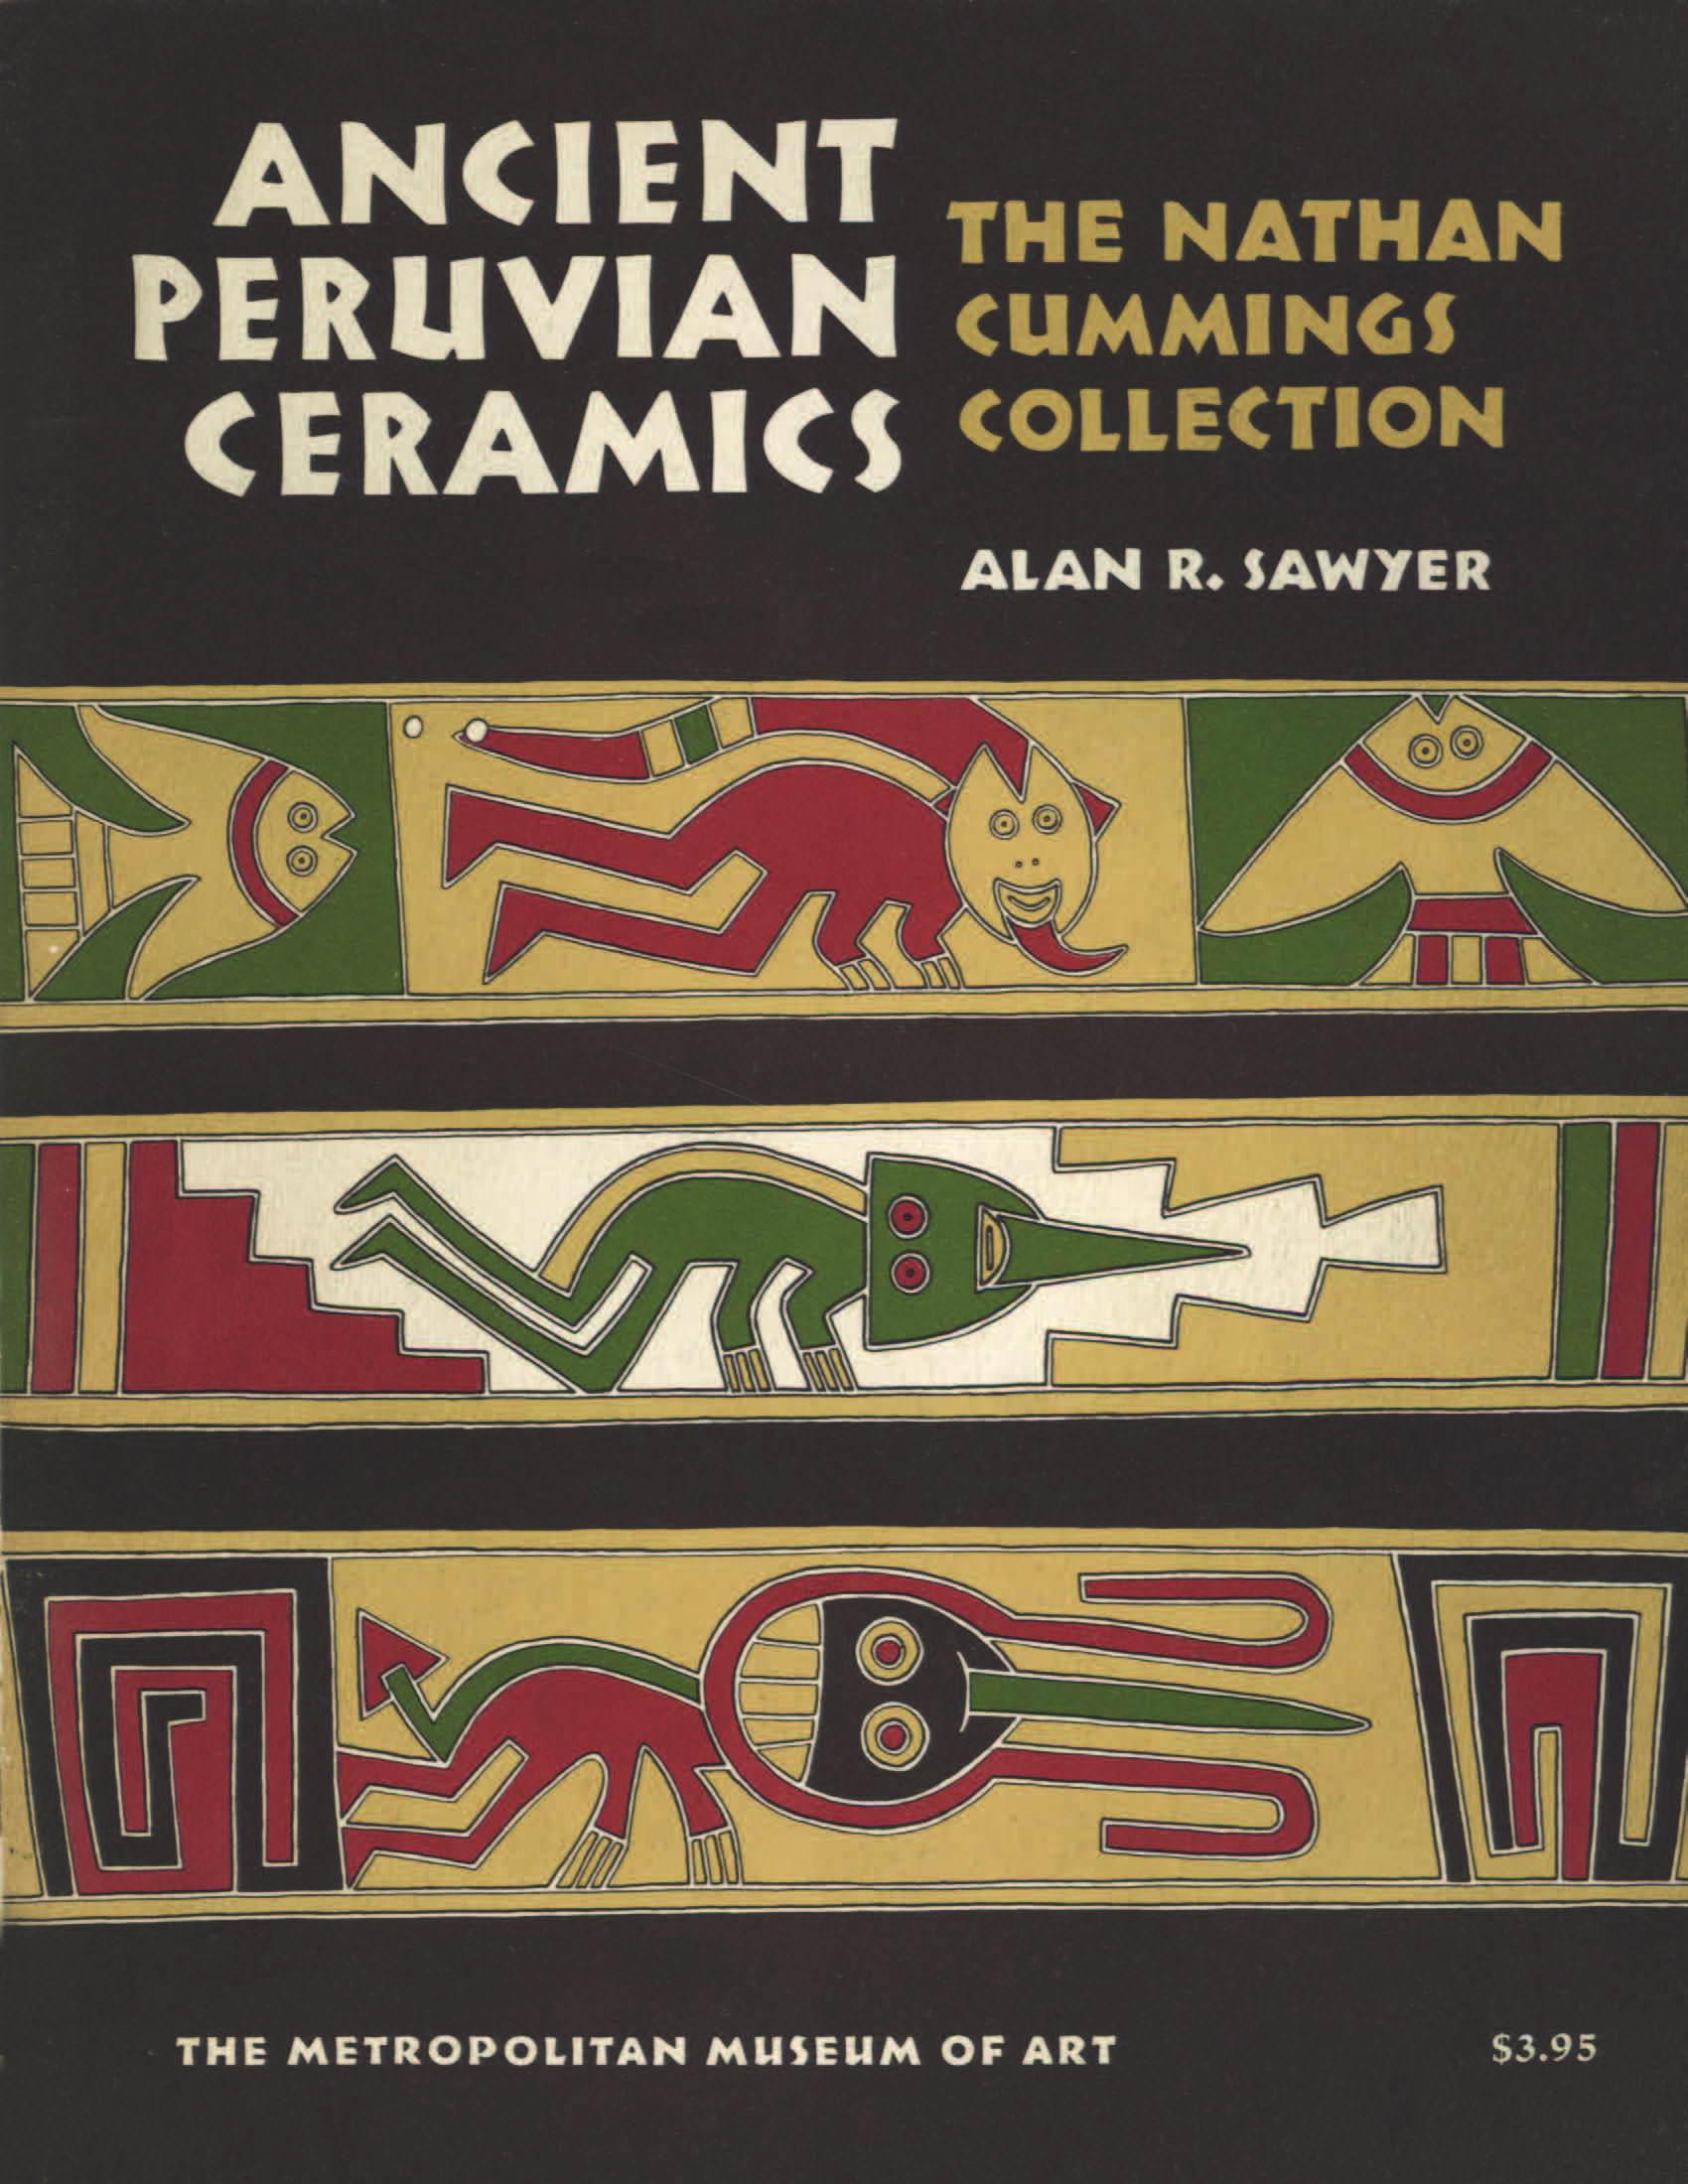 Ancient Peruvian Ceramics: The Nathan Cummings Collection / by Alan R. Sawyer with drawings by Milton F. Sonday, Jr. and photographs by William F. Pons and William E. Lyall. — New York : The Metropolitan Museum of Art, 1966